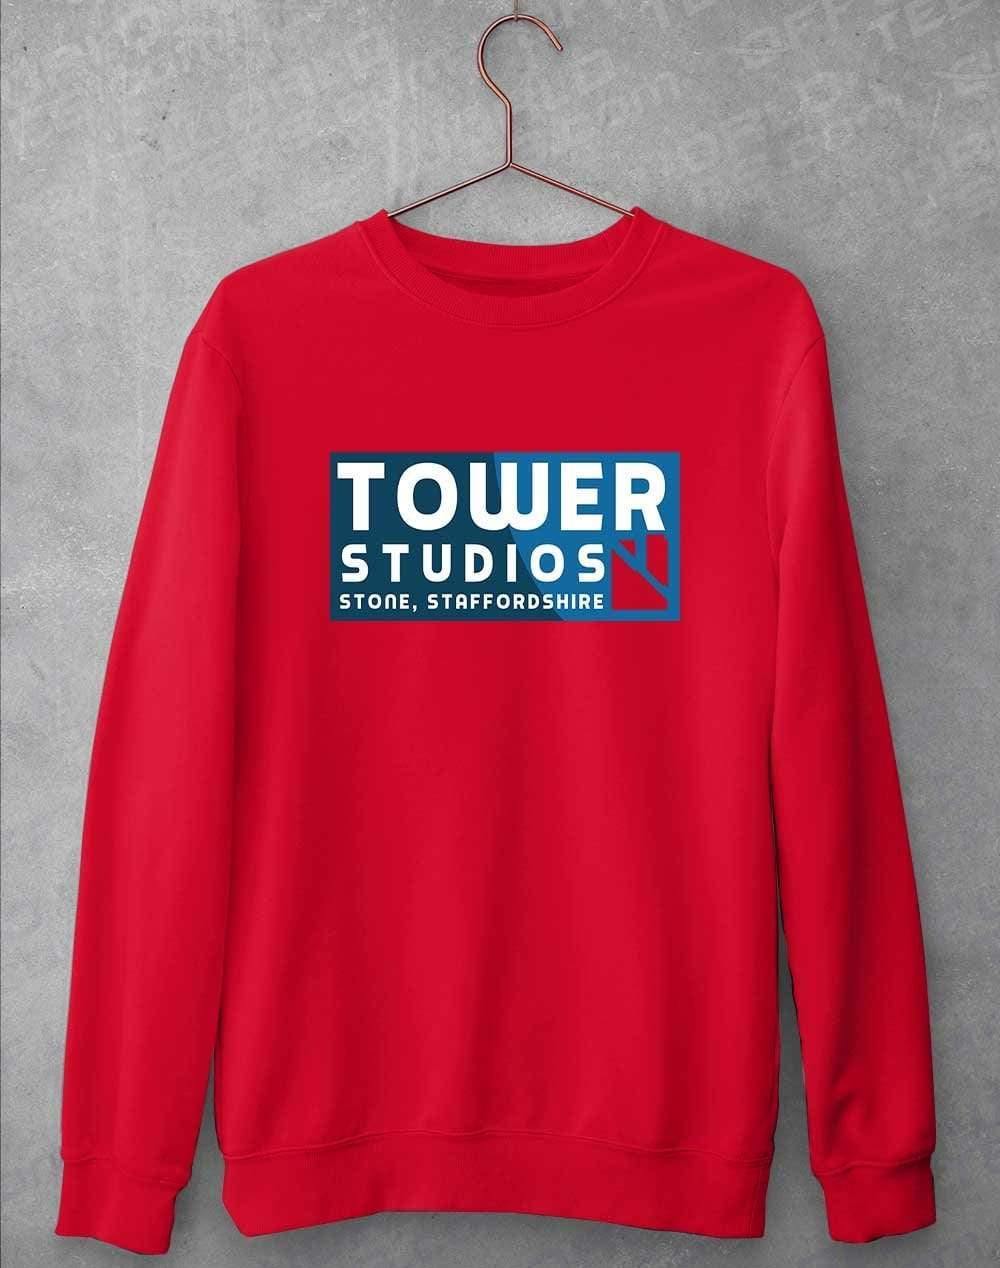 Tower Studios Cut Out Logo Sweatshirt S / Fire Red  - Off World Tees